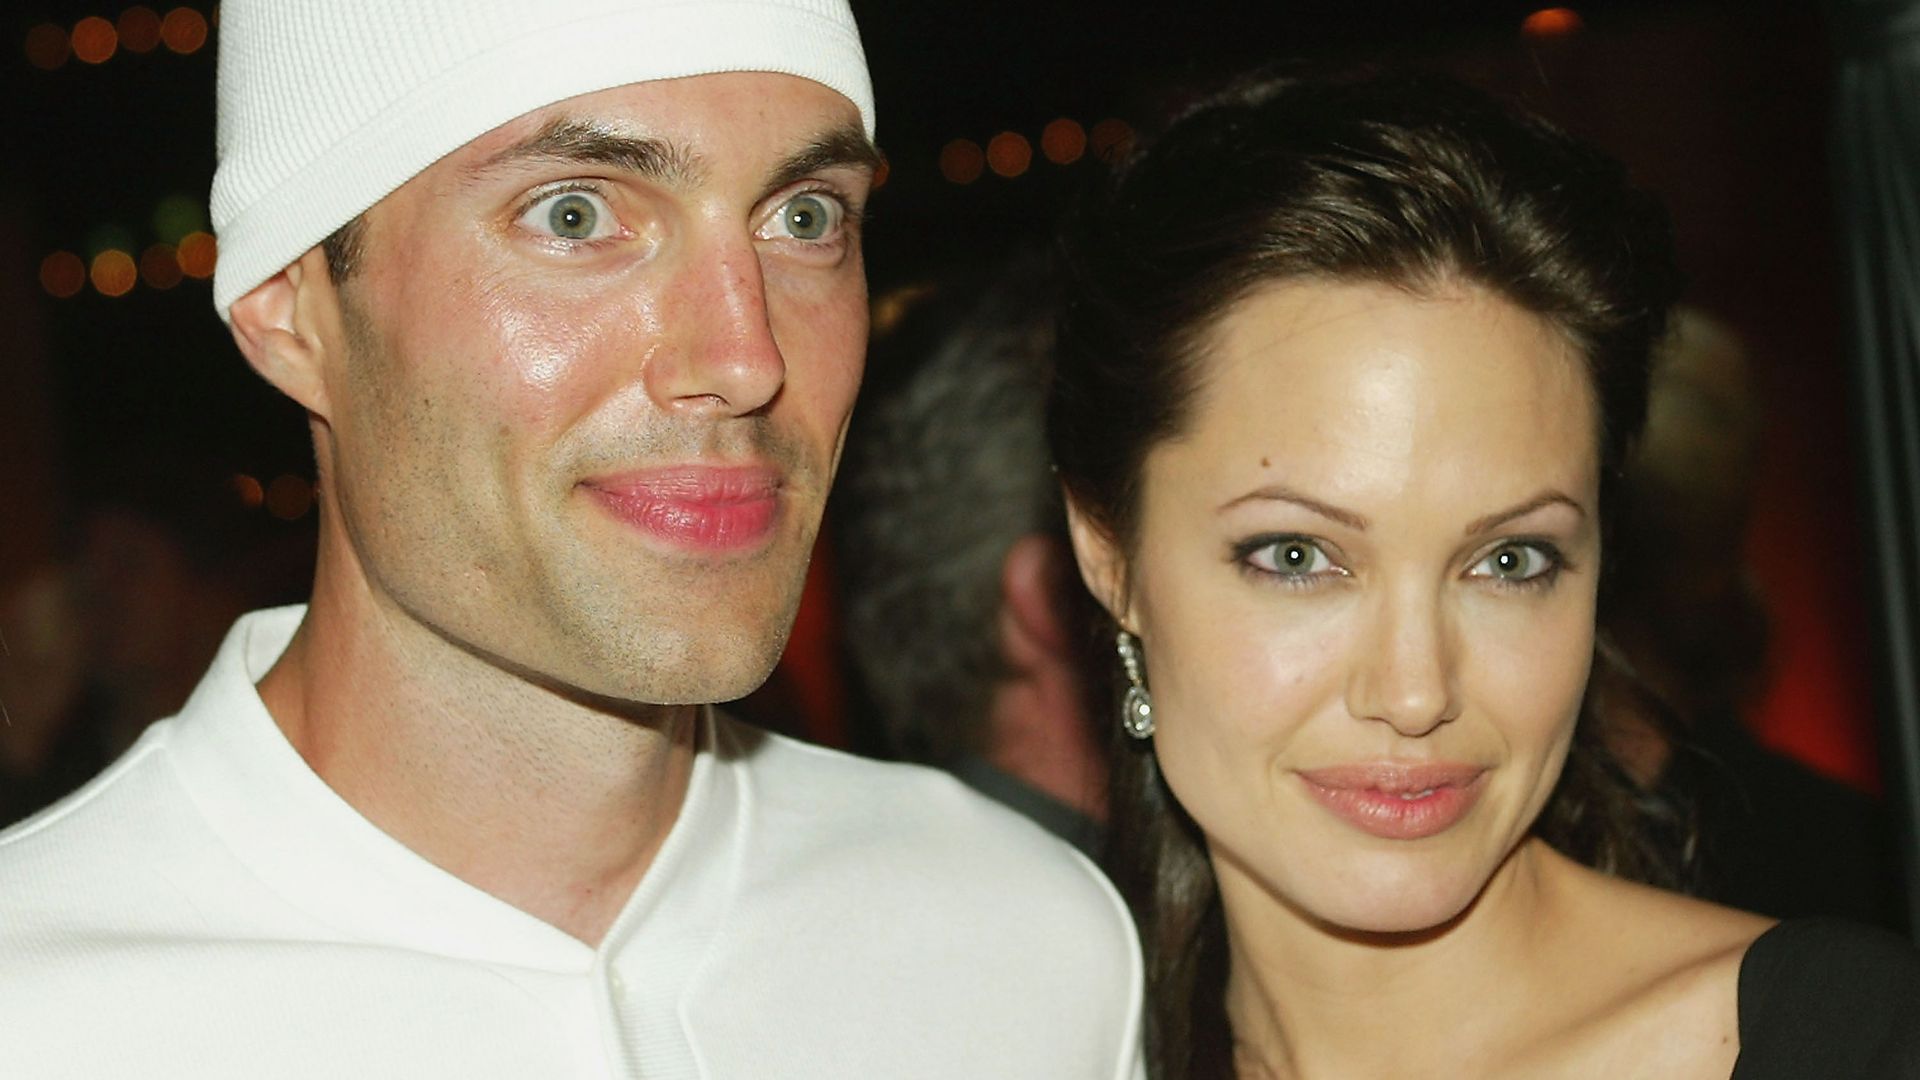 What Angelina Jolie's brother said about her romance with Brad Pitt in shocking unearthed interview